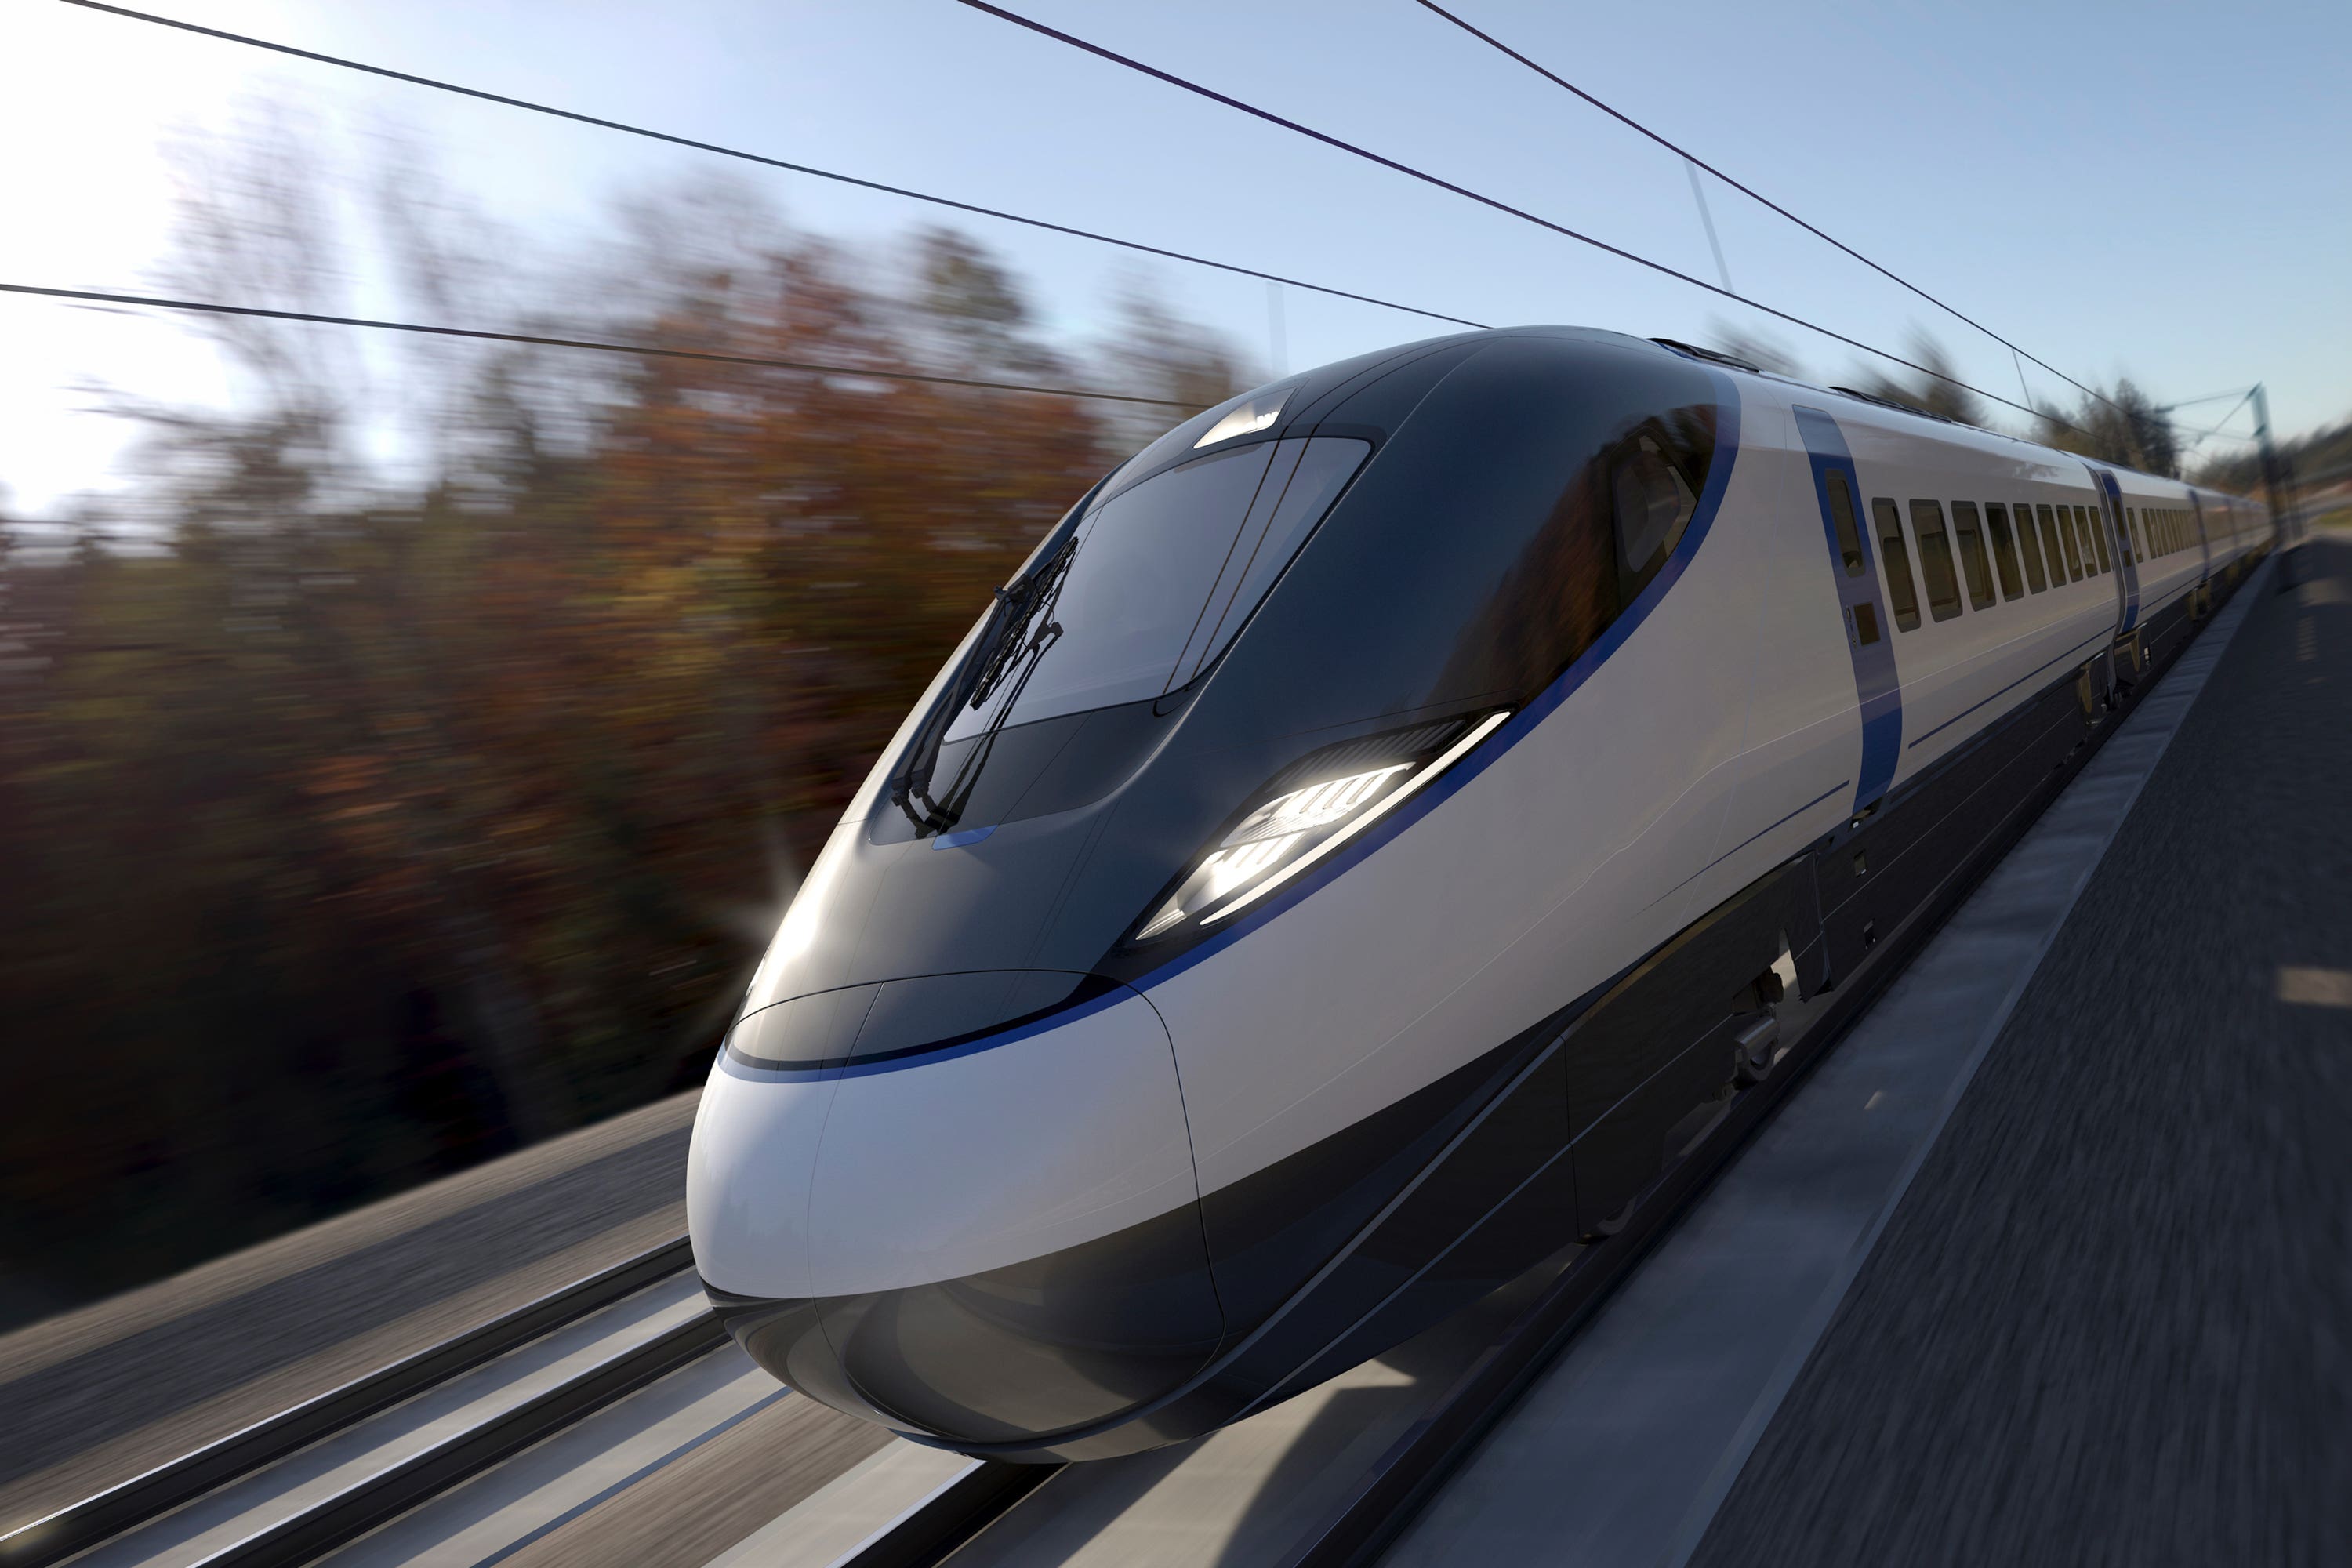 Trains on HS2 will travel at up to 225mph